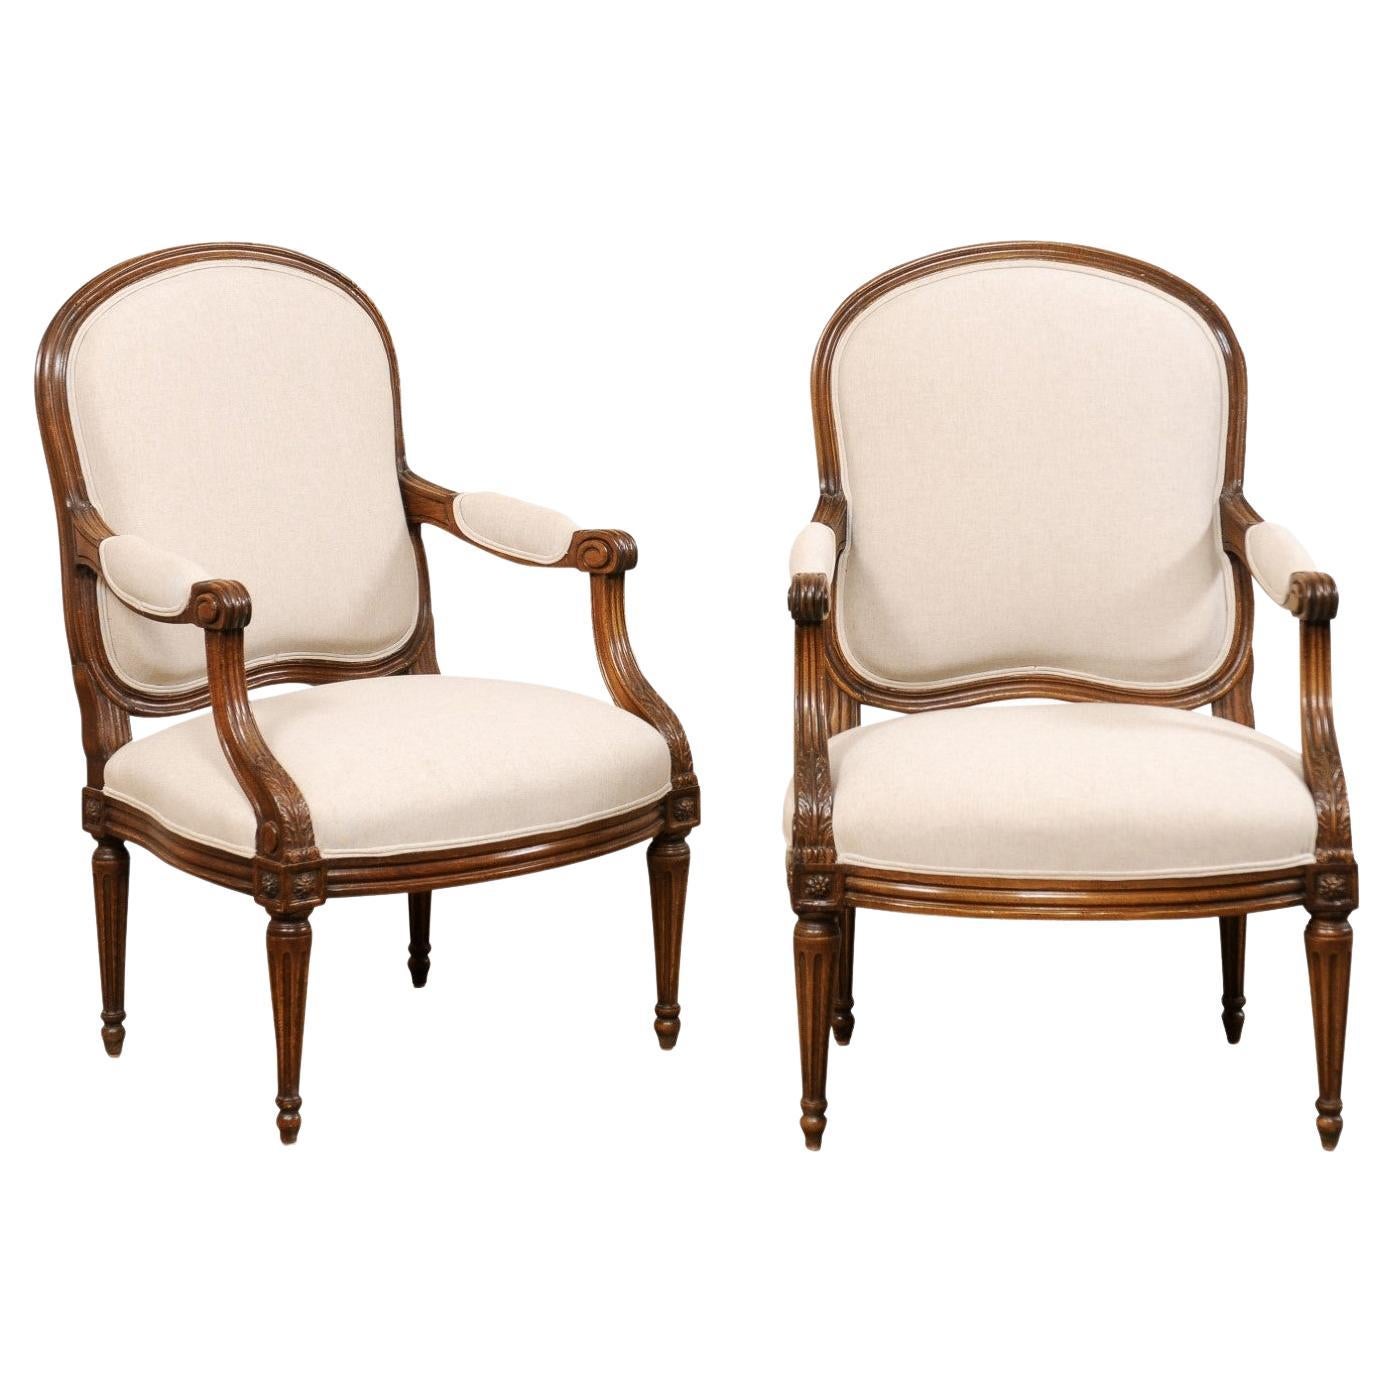 19th C. French Pair Carved-Wood Fauteuil Armchairs, Newly Upholstered in Linen For Sale